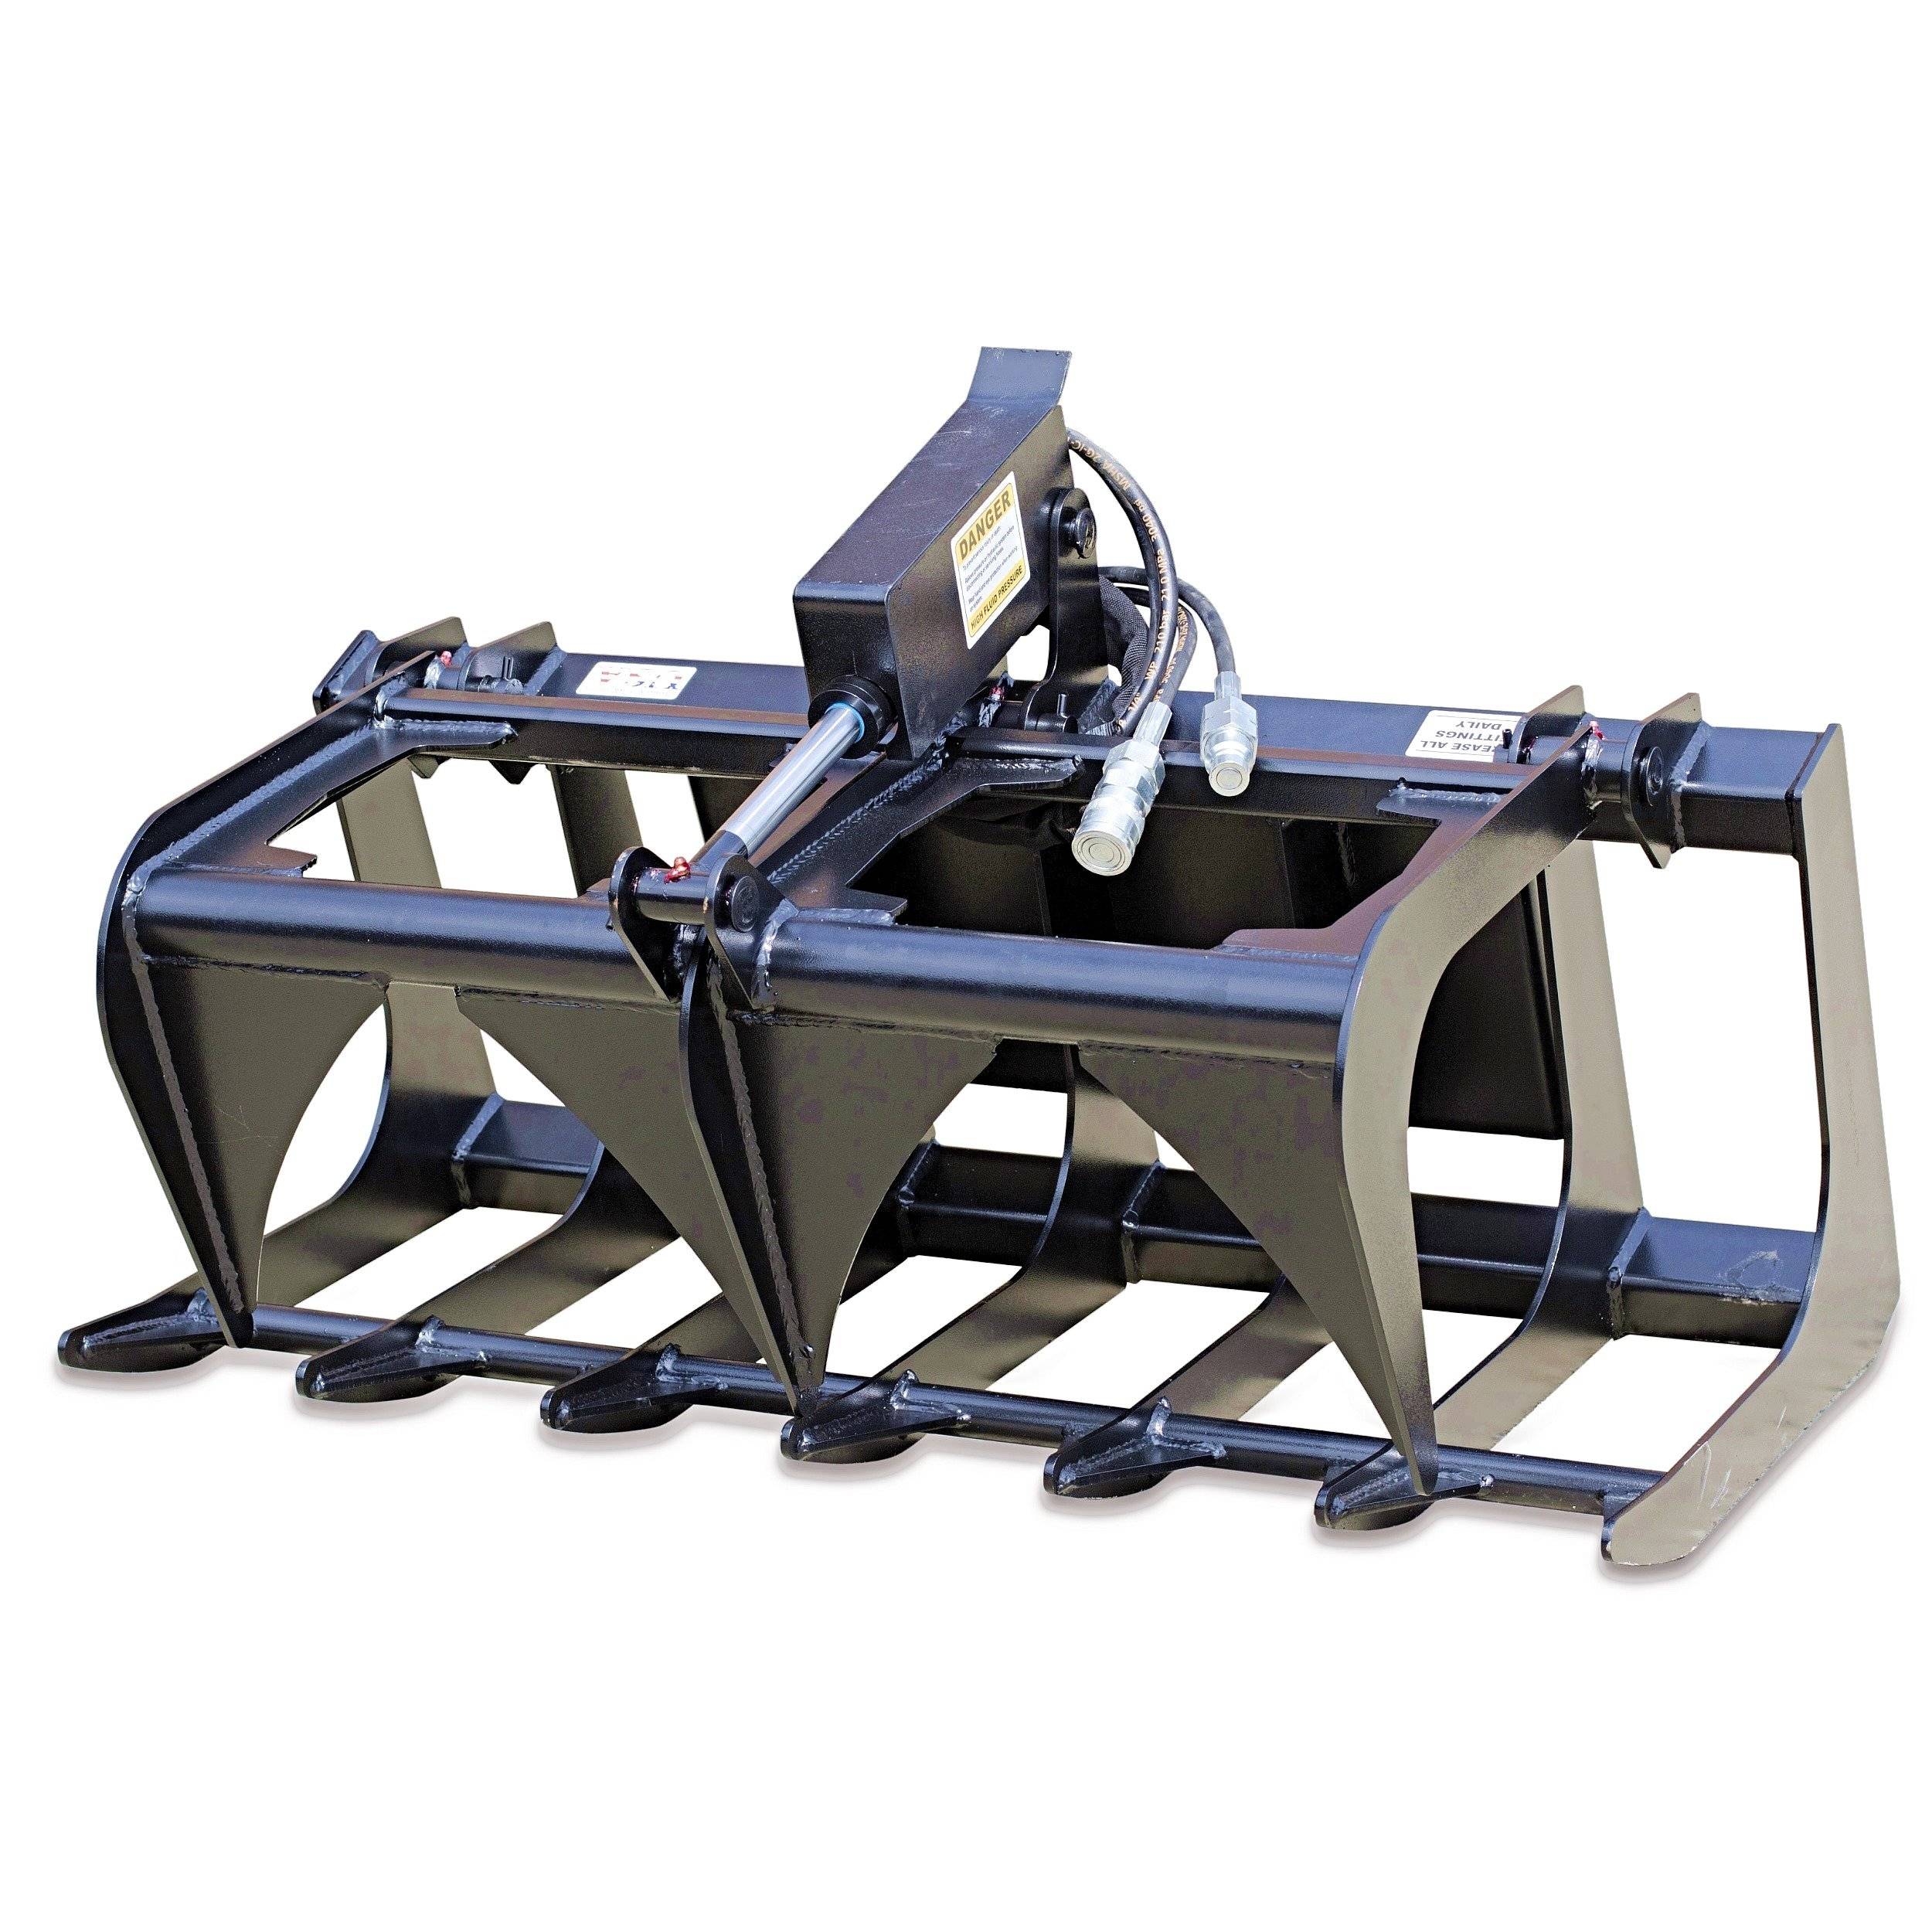 Grapple Bucket, Compact Tool Carriers